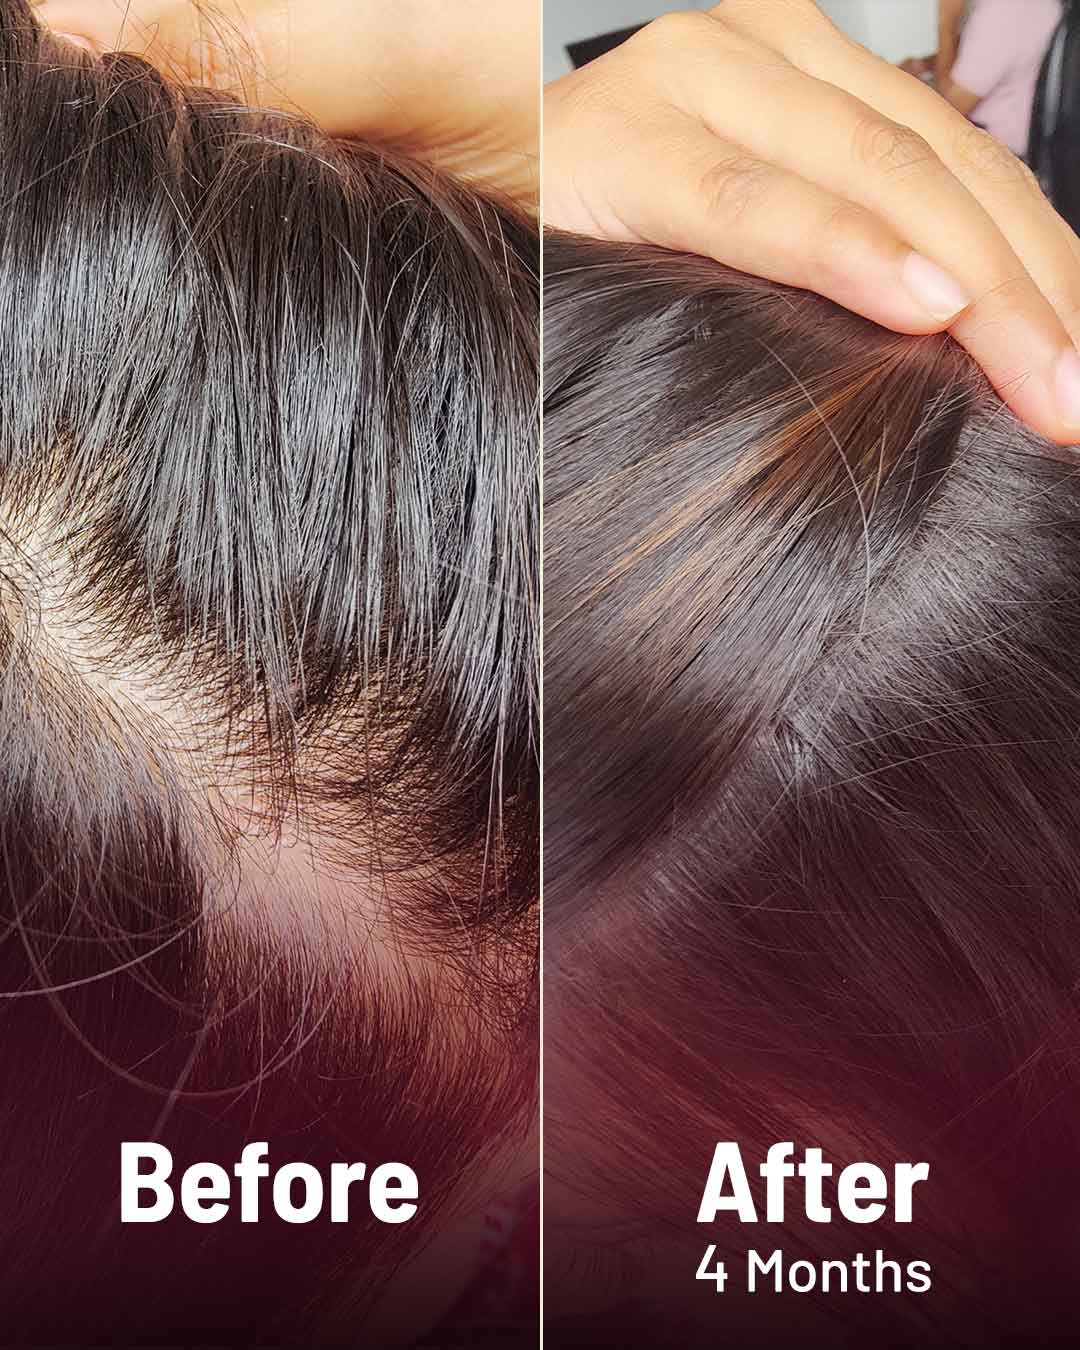 Hair loss treatment Antiandrogens ideal for women with polycystic ovaries   Expresscouk